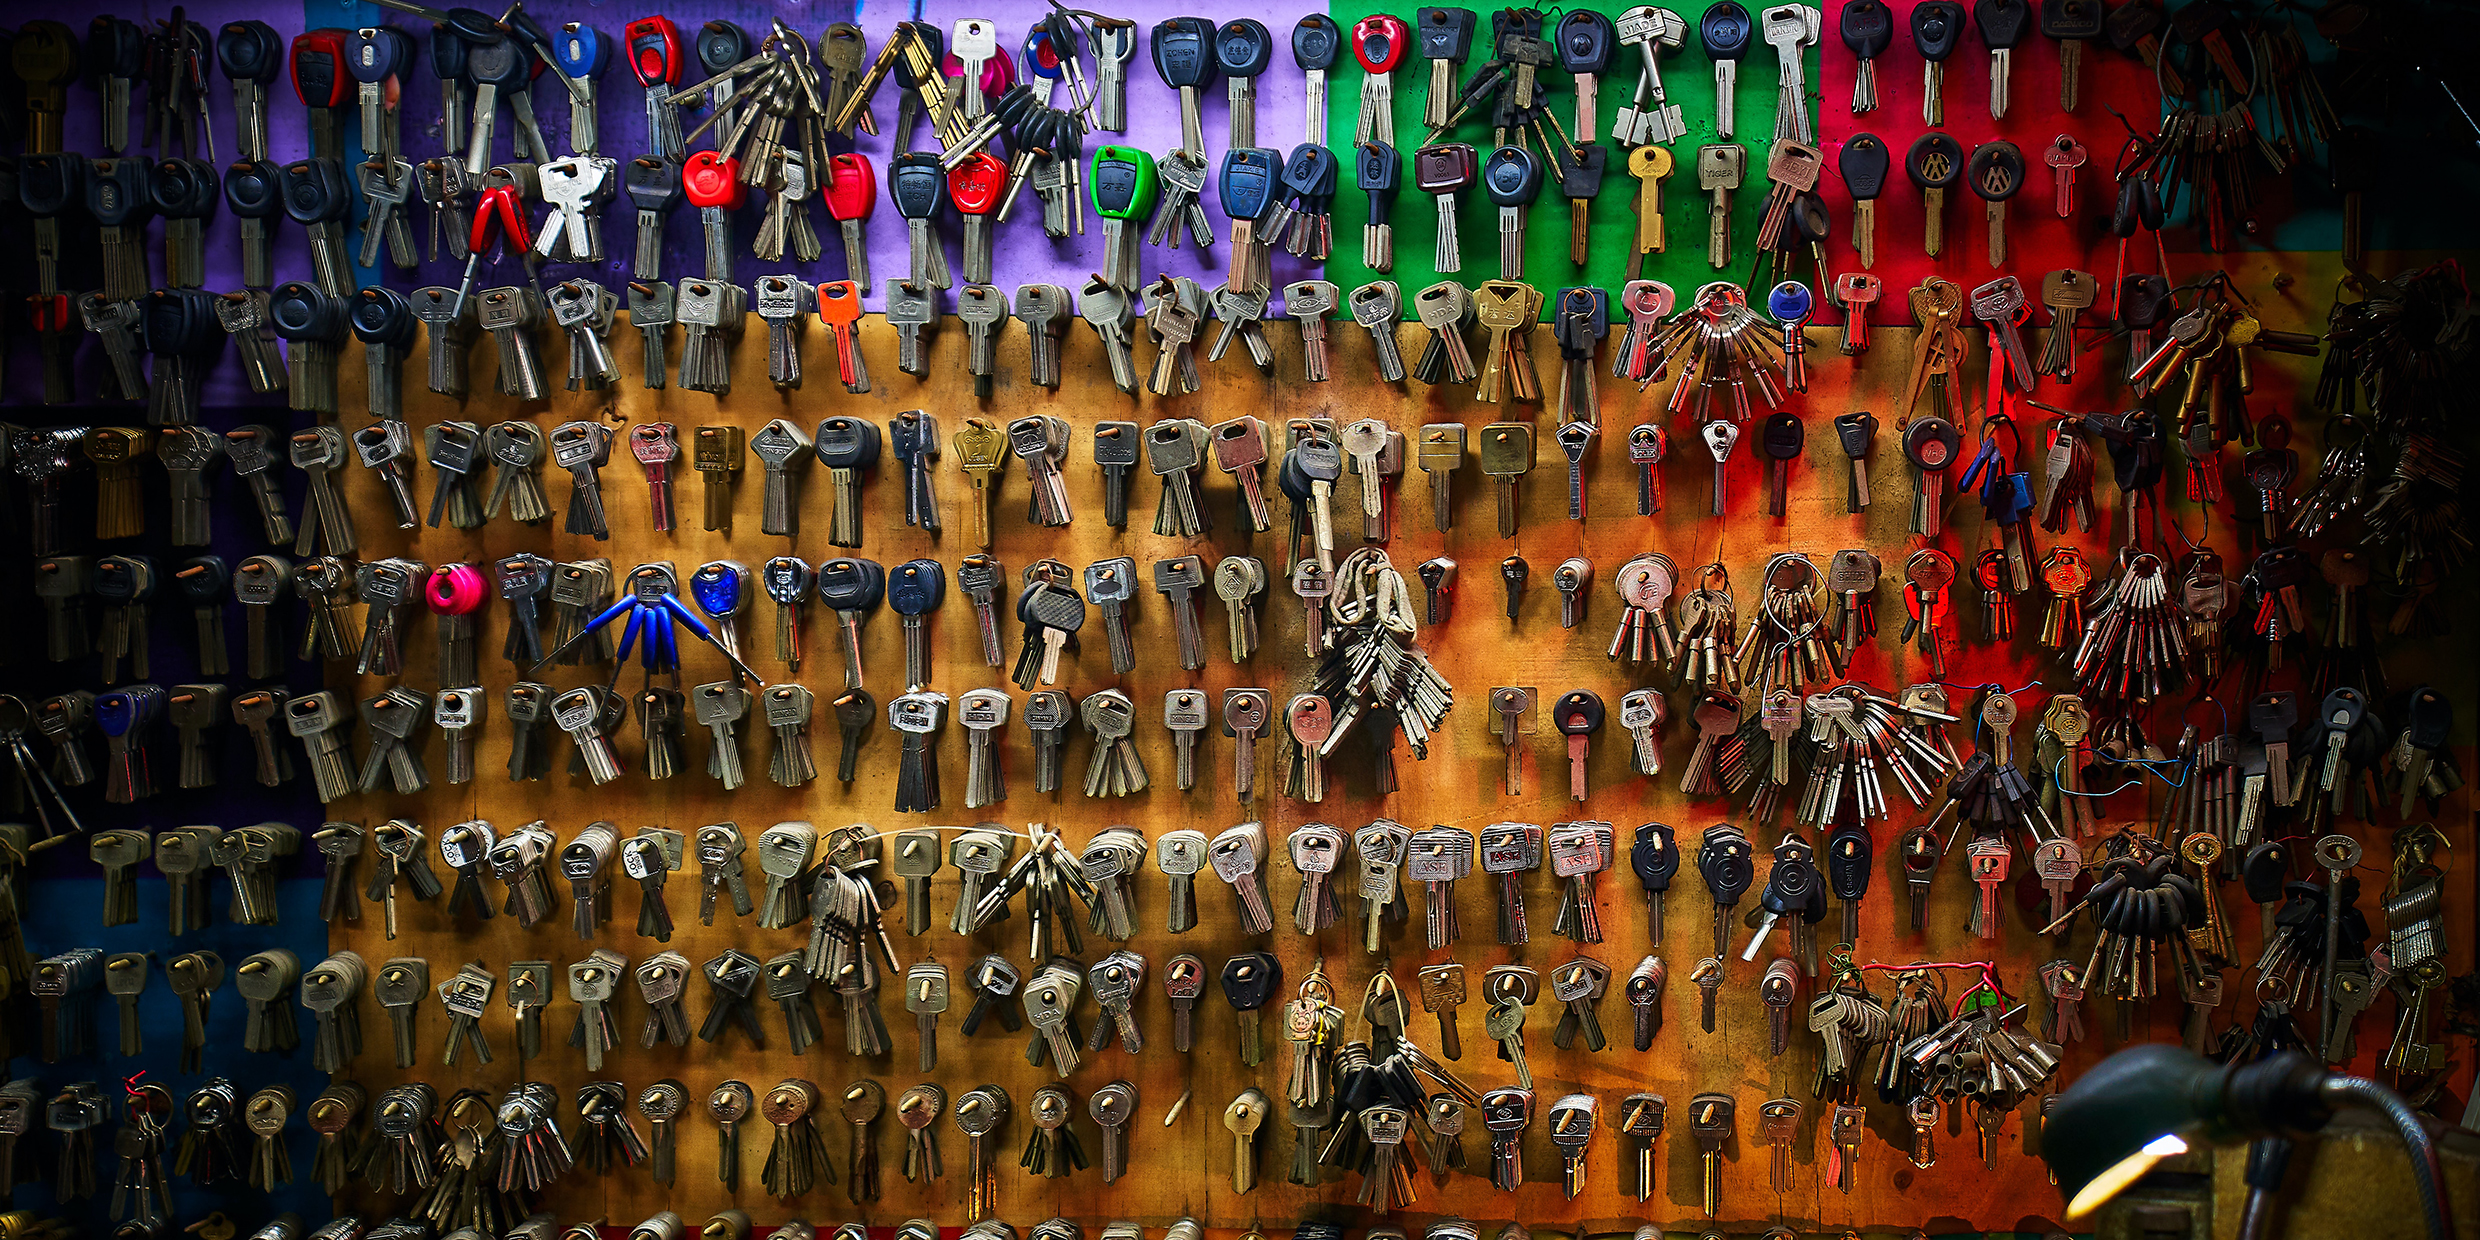 Image of a large assortment of keys hanging from a peg board